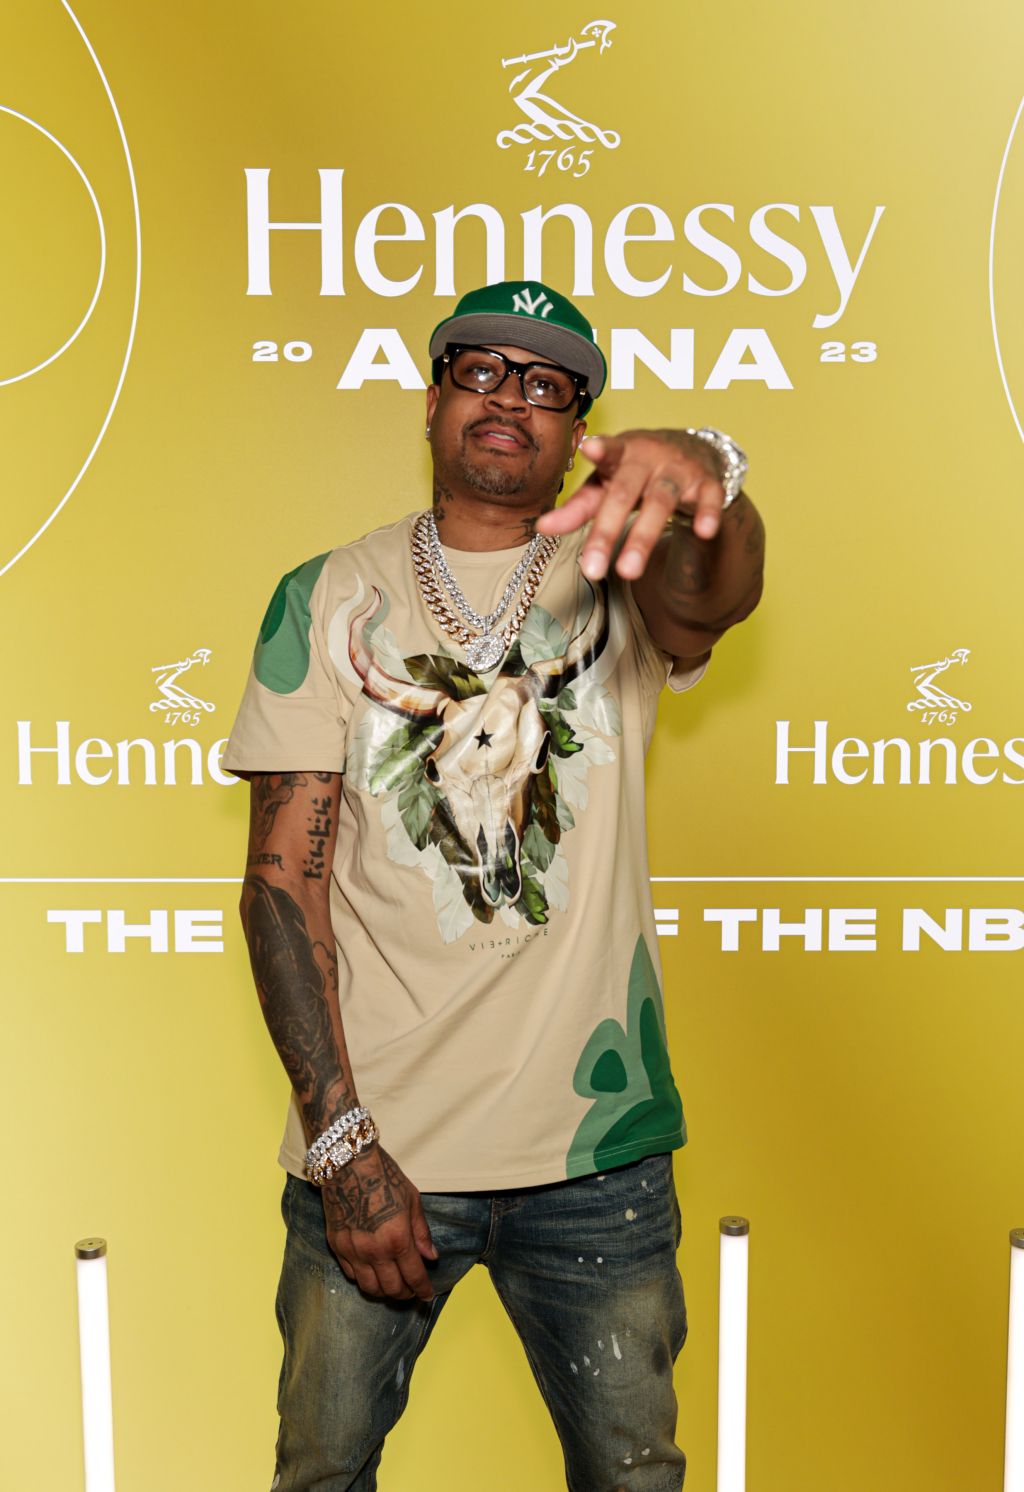 Allen Iverson - Hennessy Arena All-Star Weekend at Edison House, Salt Lake City